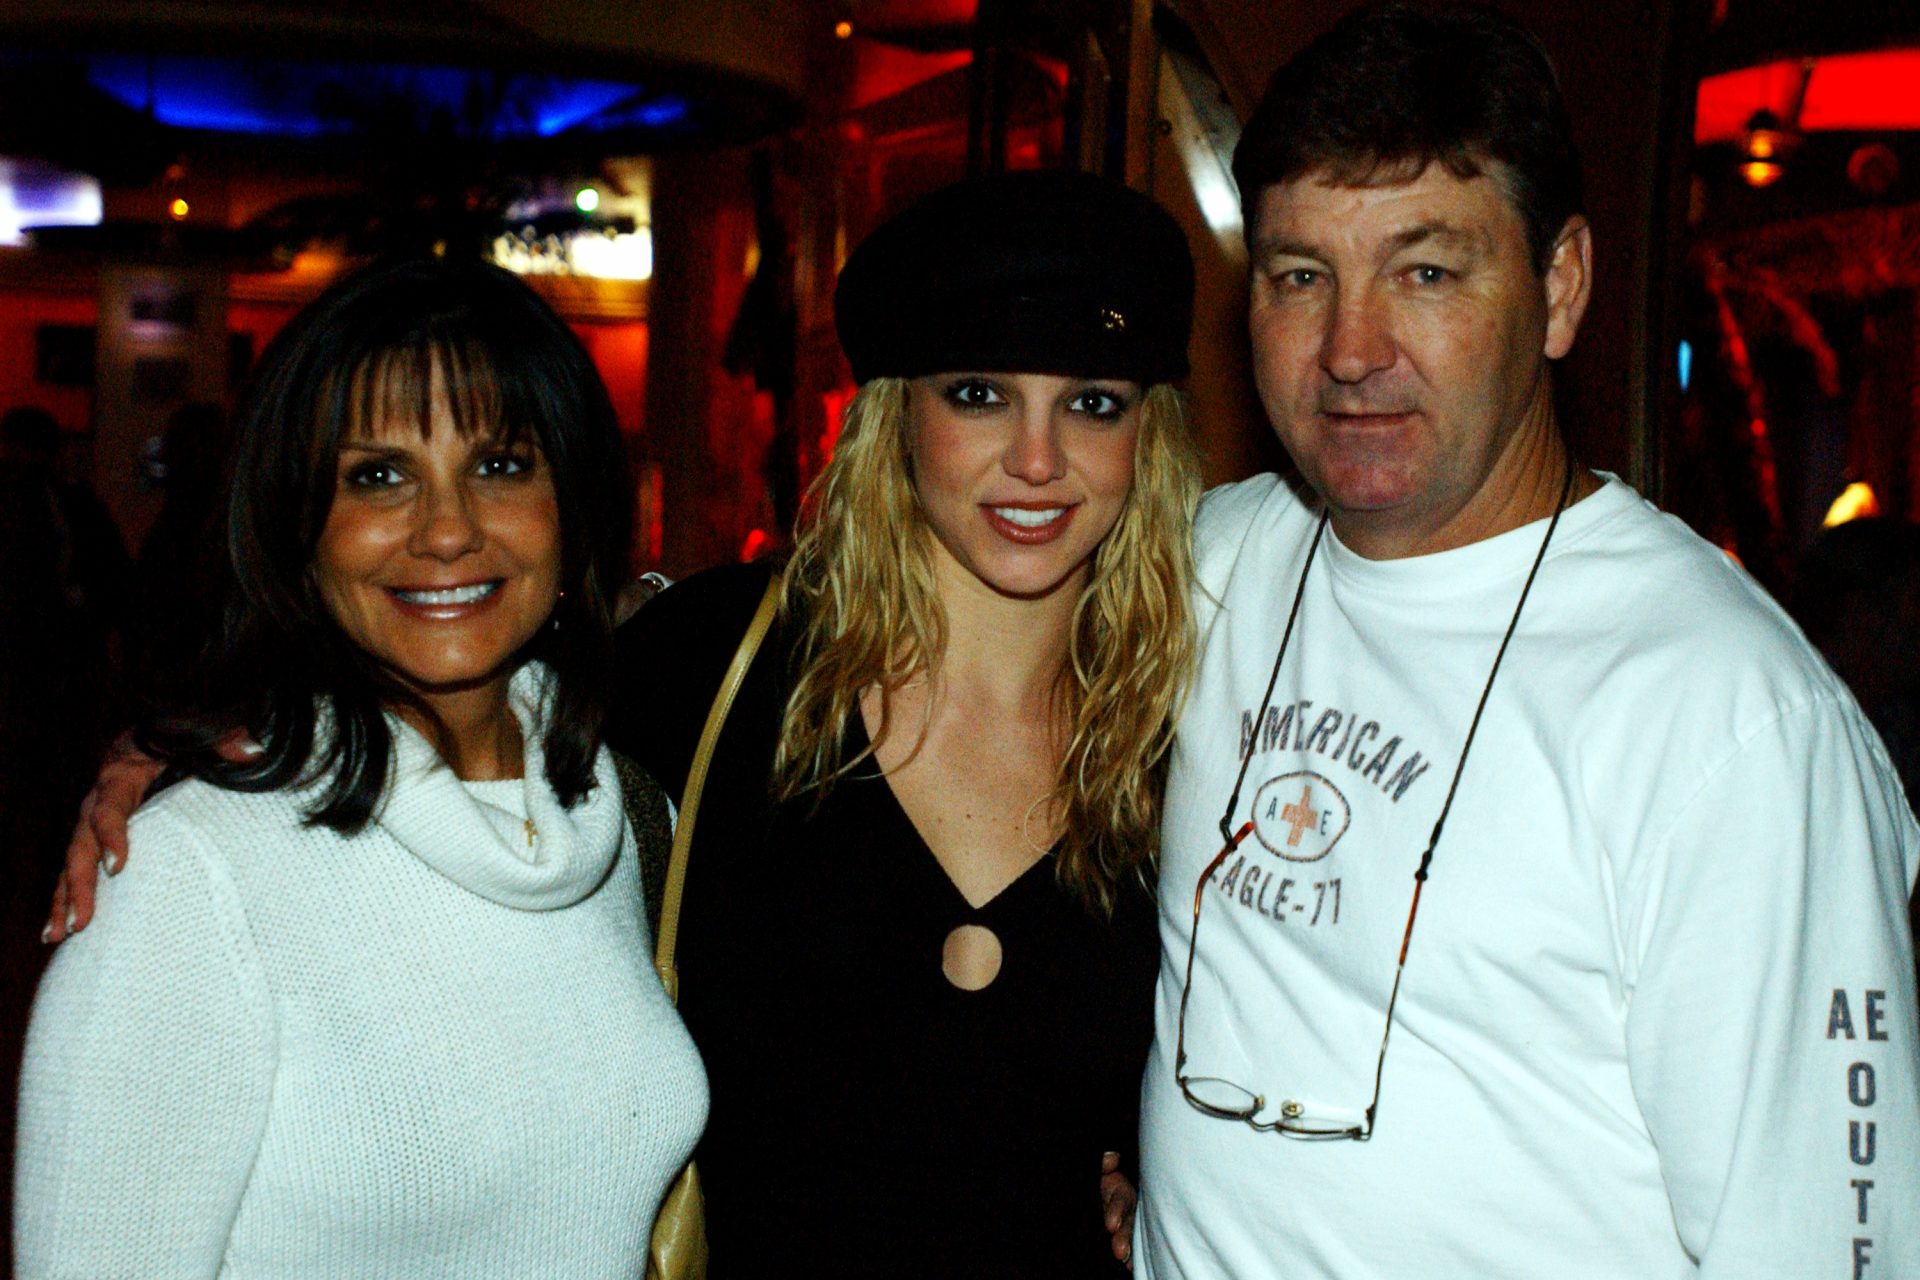 The serious illness of Jamie Spears, Britney Spears' father